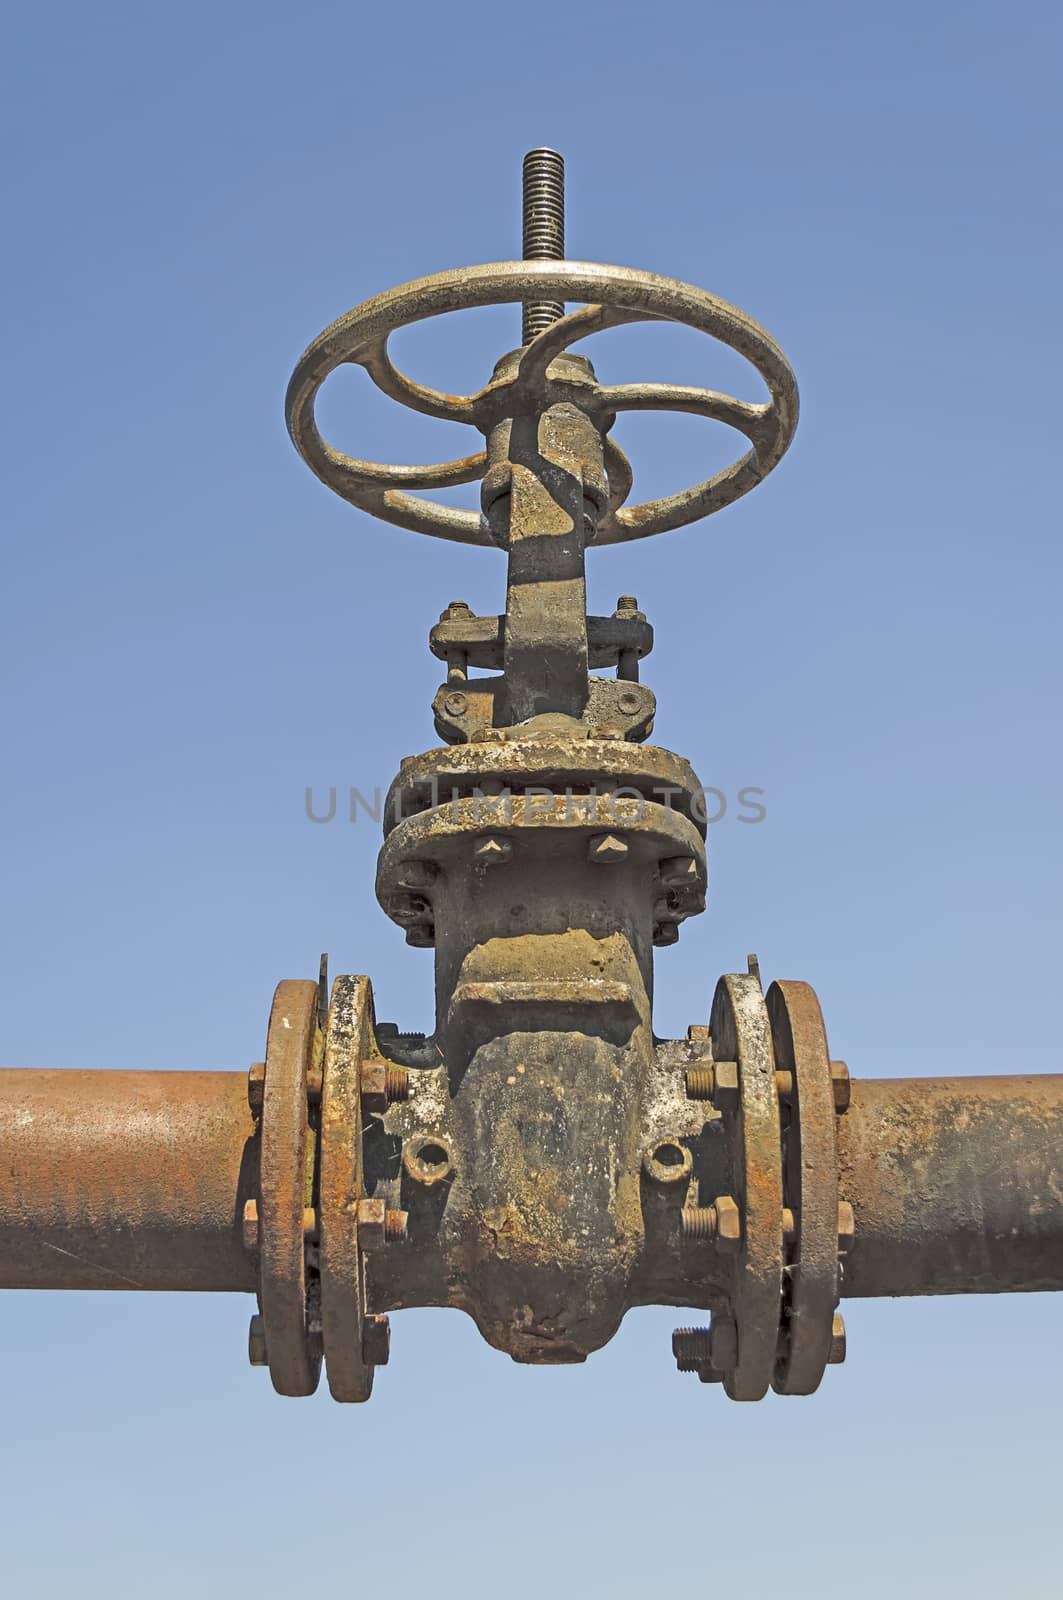 Old water pipe with large valve on blue sky background